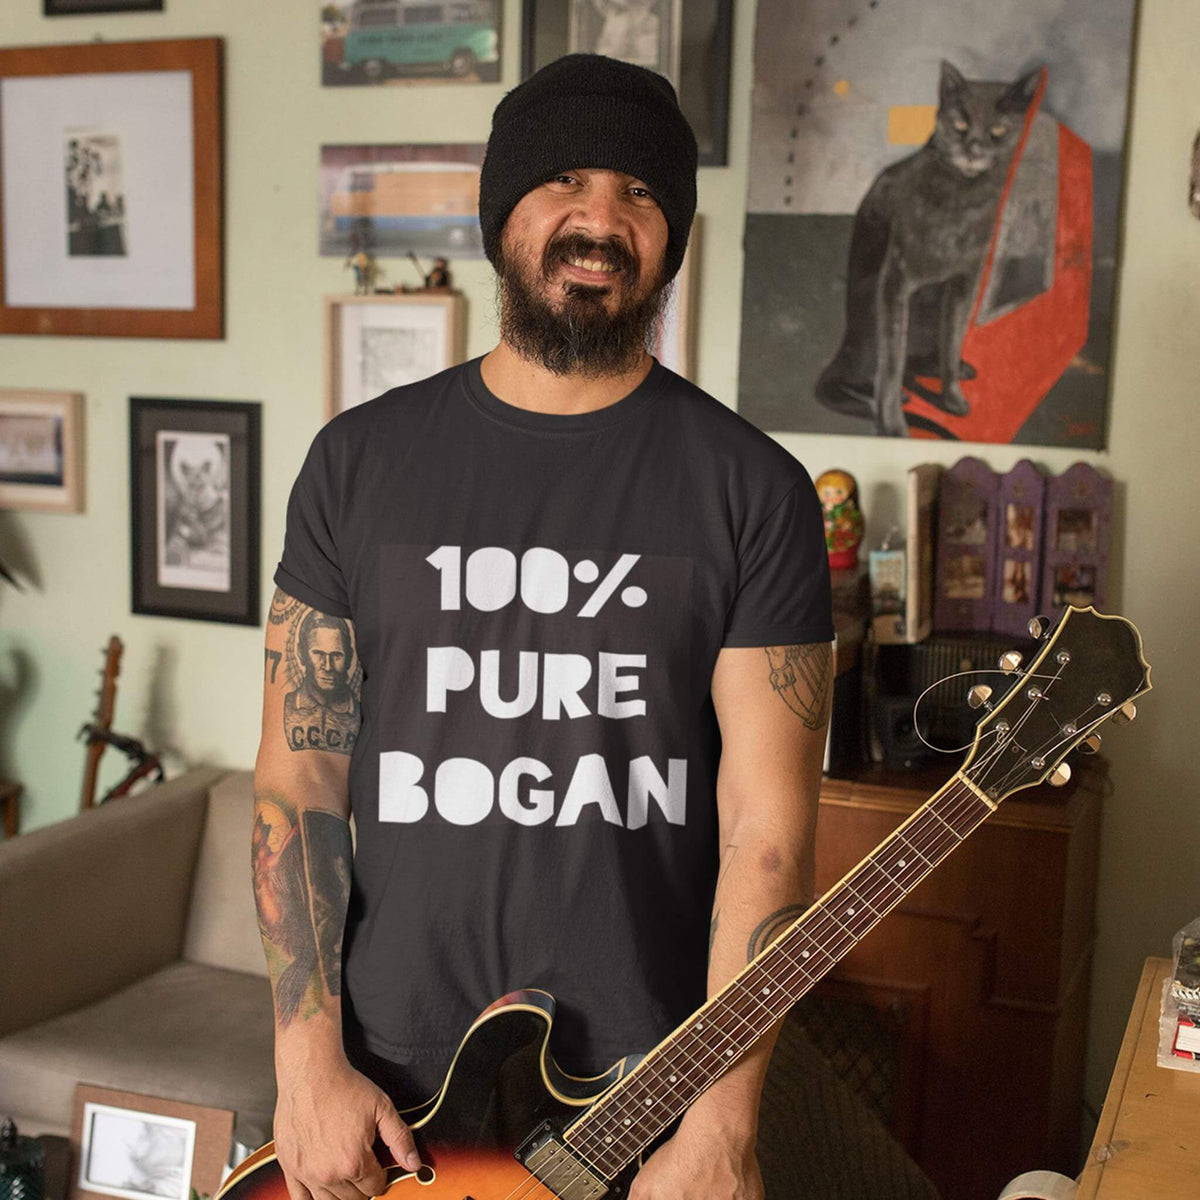 Man playing guitar wears black t shirt with 100% Pure Bogan on the front